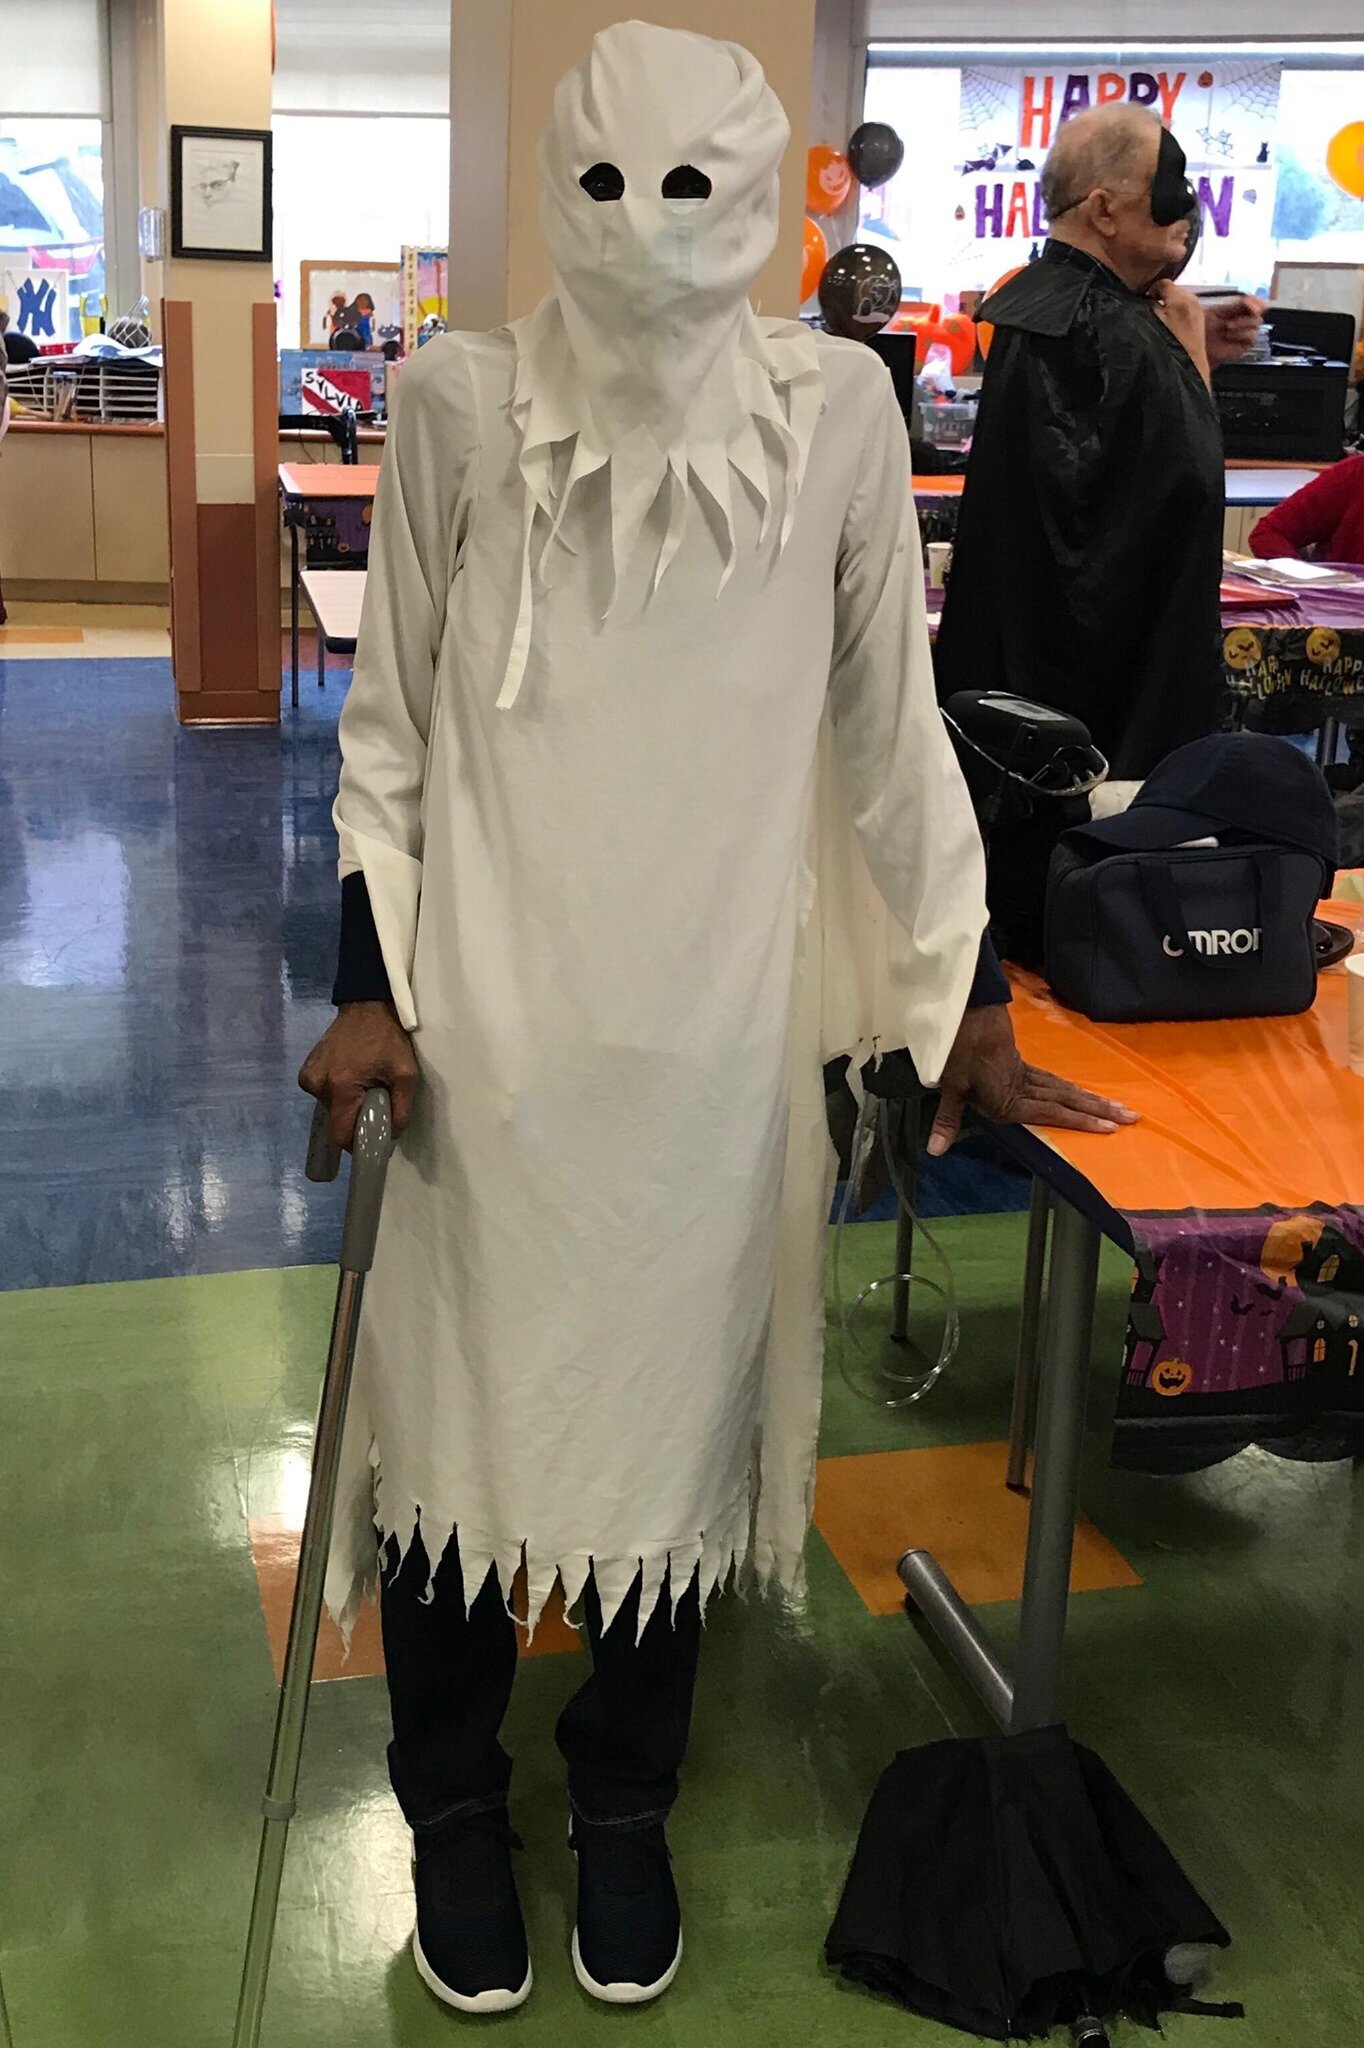 participant in ghost costume